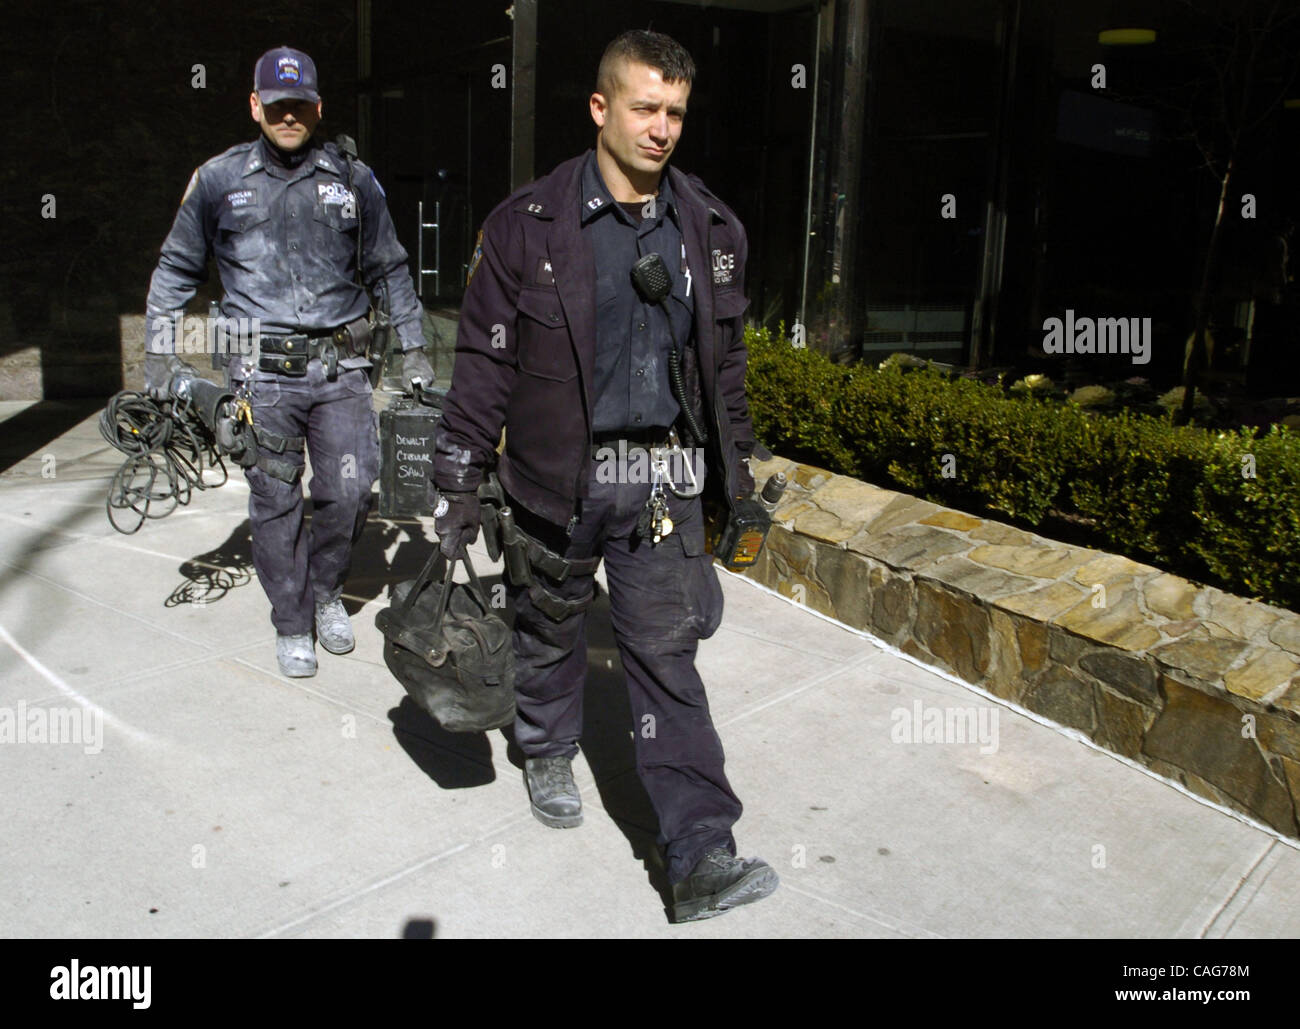 NYPD ESU officers exit the office building of Kathryn Faughy. Kathryn Faughy, an Upper East Side psychologist was violently murdered in her office on East 79th Street two nights ago by a man who brought along two bags filled with knives, rope, duct tape, women's clothing and adult diapers. Stock Photo